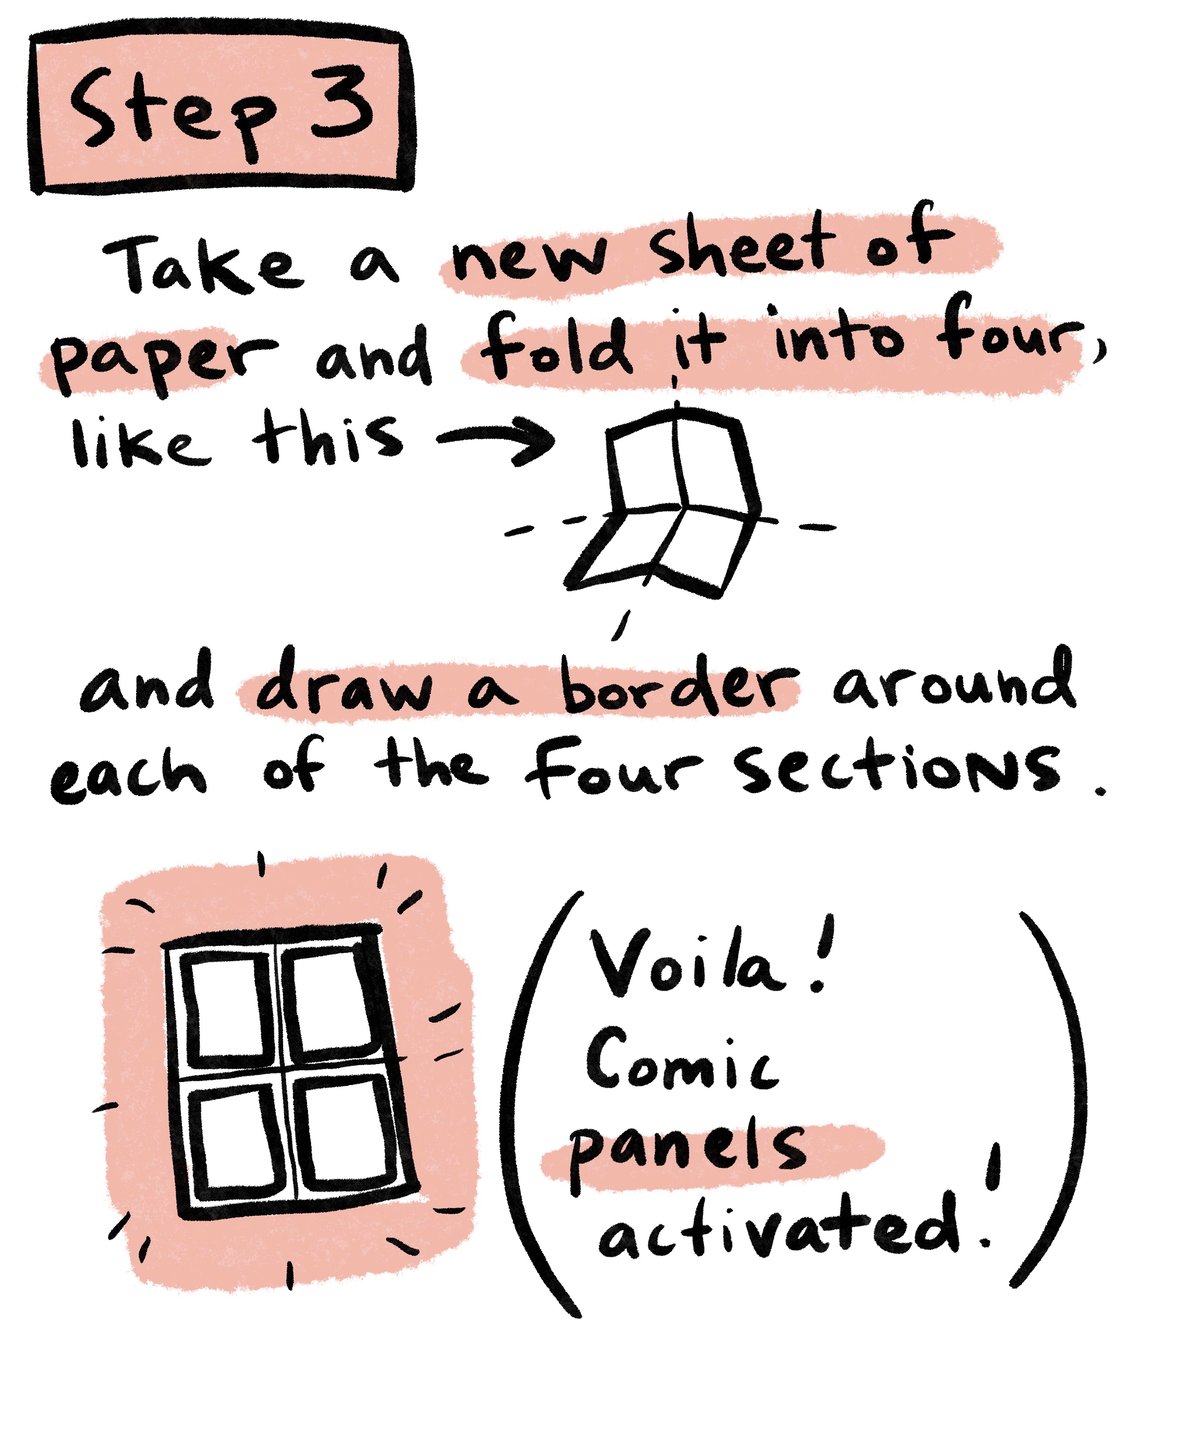 This is Step 3. There is a drawing of a piece of paper folded halfway vertically and horizontally. The text reads: Take a new sheet of paper and fold it into four, like this, and draw a border around each of the four sections. Voila! Comic panels activated!  